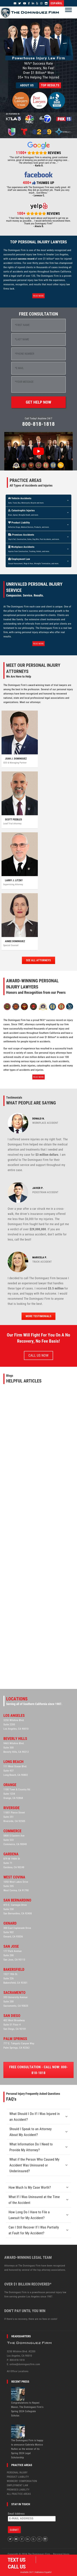 The Dominguez Firm - West Covina CA Lawyers